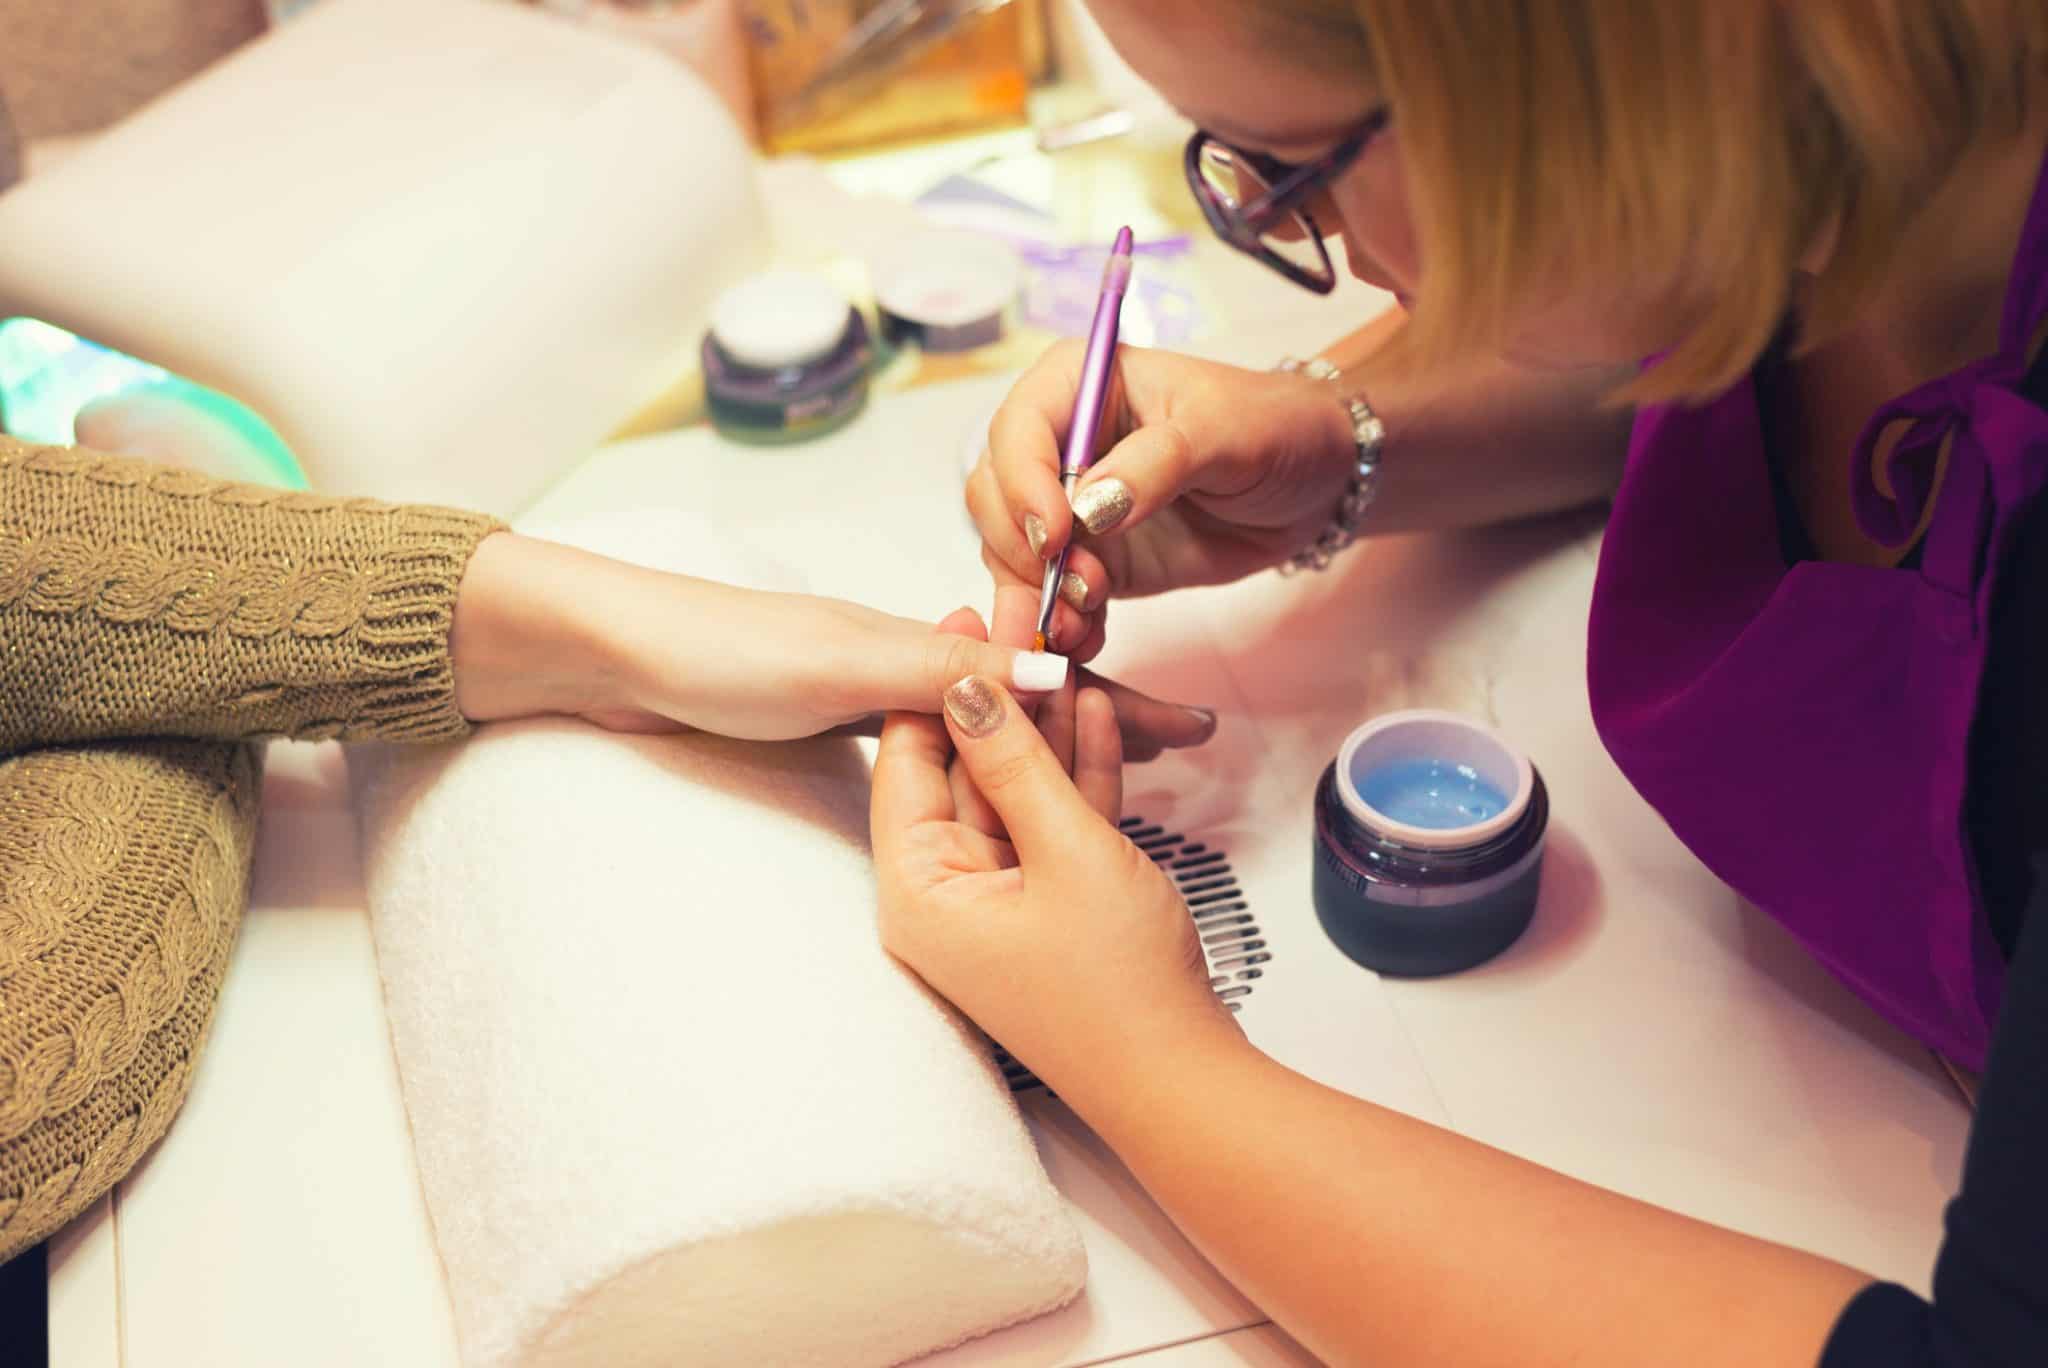 How to become a nail technician from home